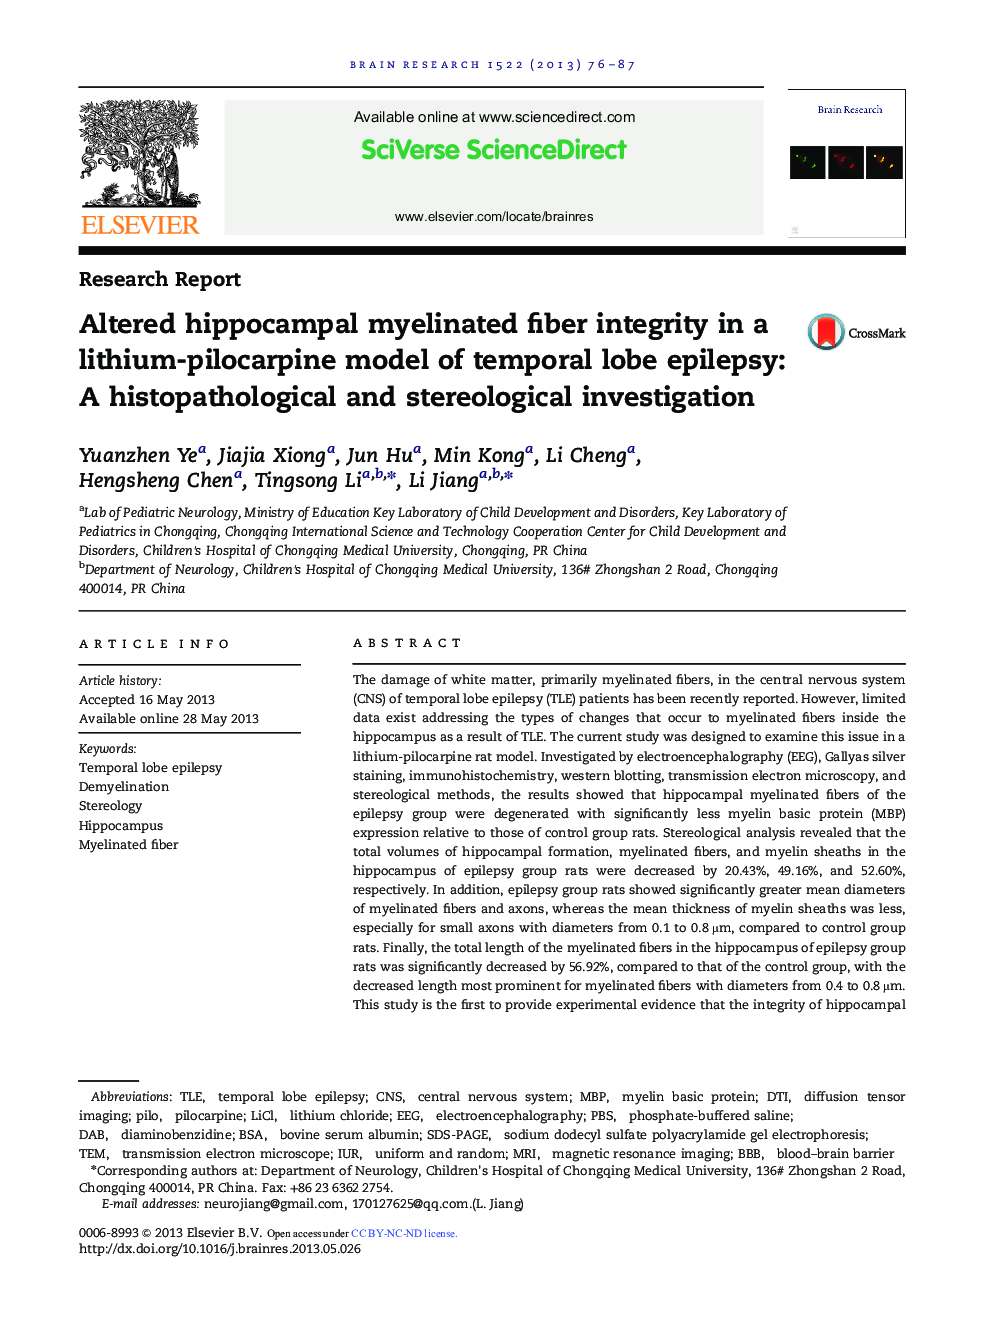 Altered hippocampal myelinated fiber integrity in a lithium-pilocarpine model of temporal lobe epilepsy: A histopathological and stereological investigation